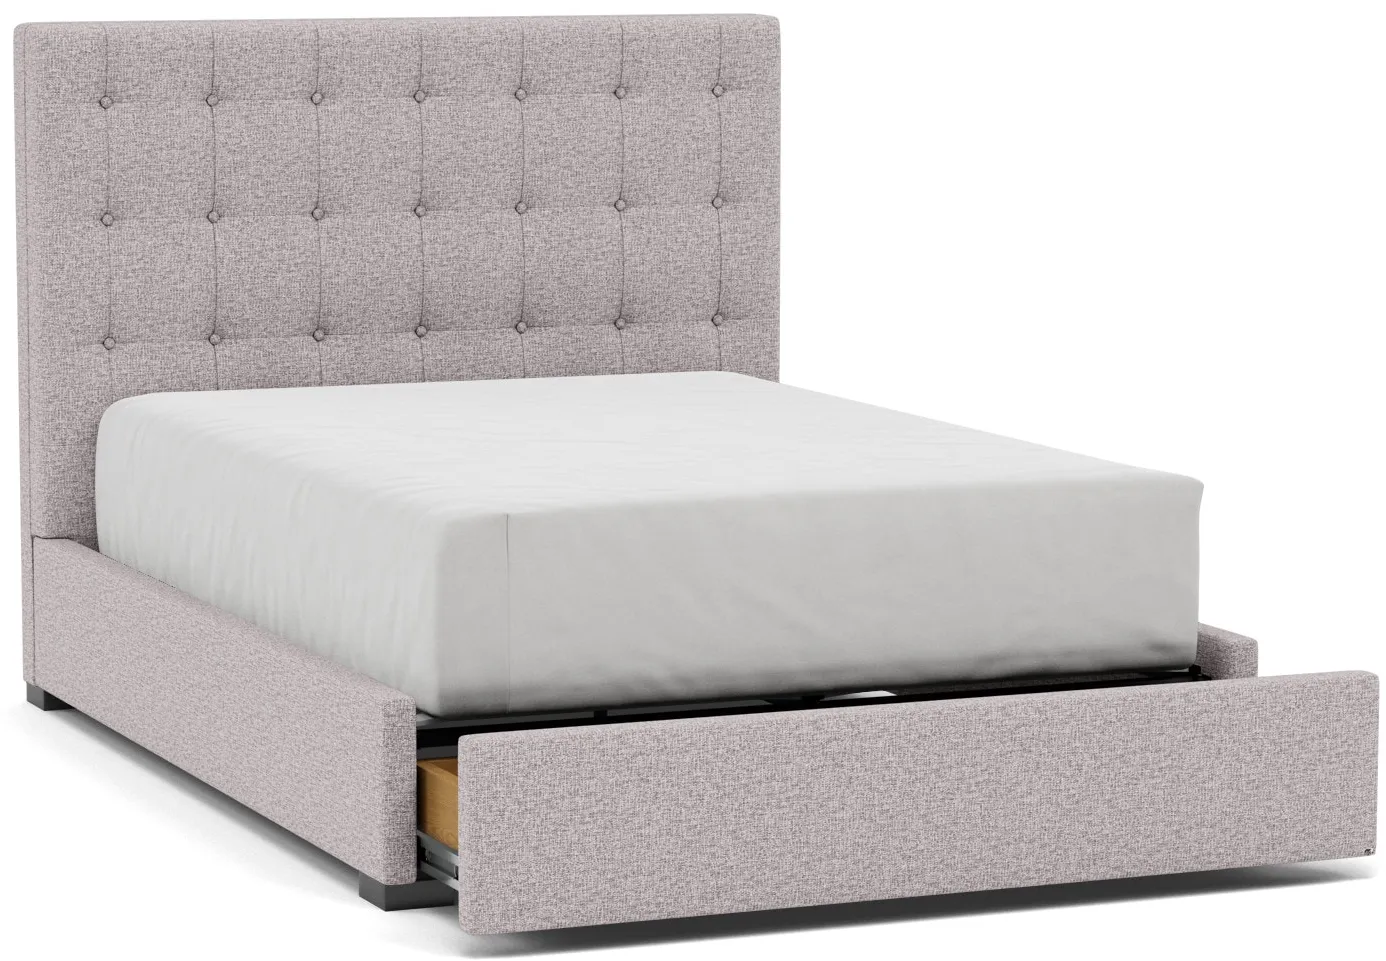 Abby Queen Upholstered Storage Bed in Tech Stone